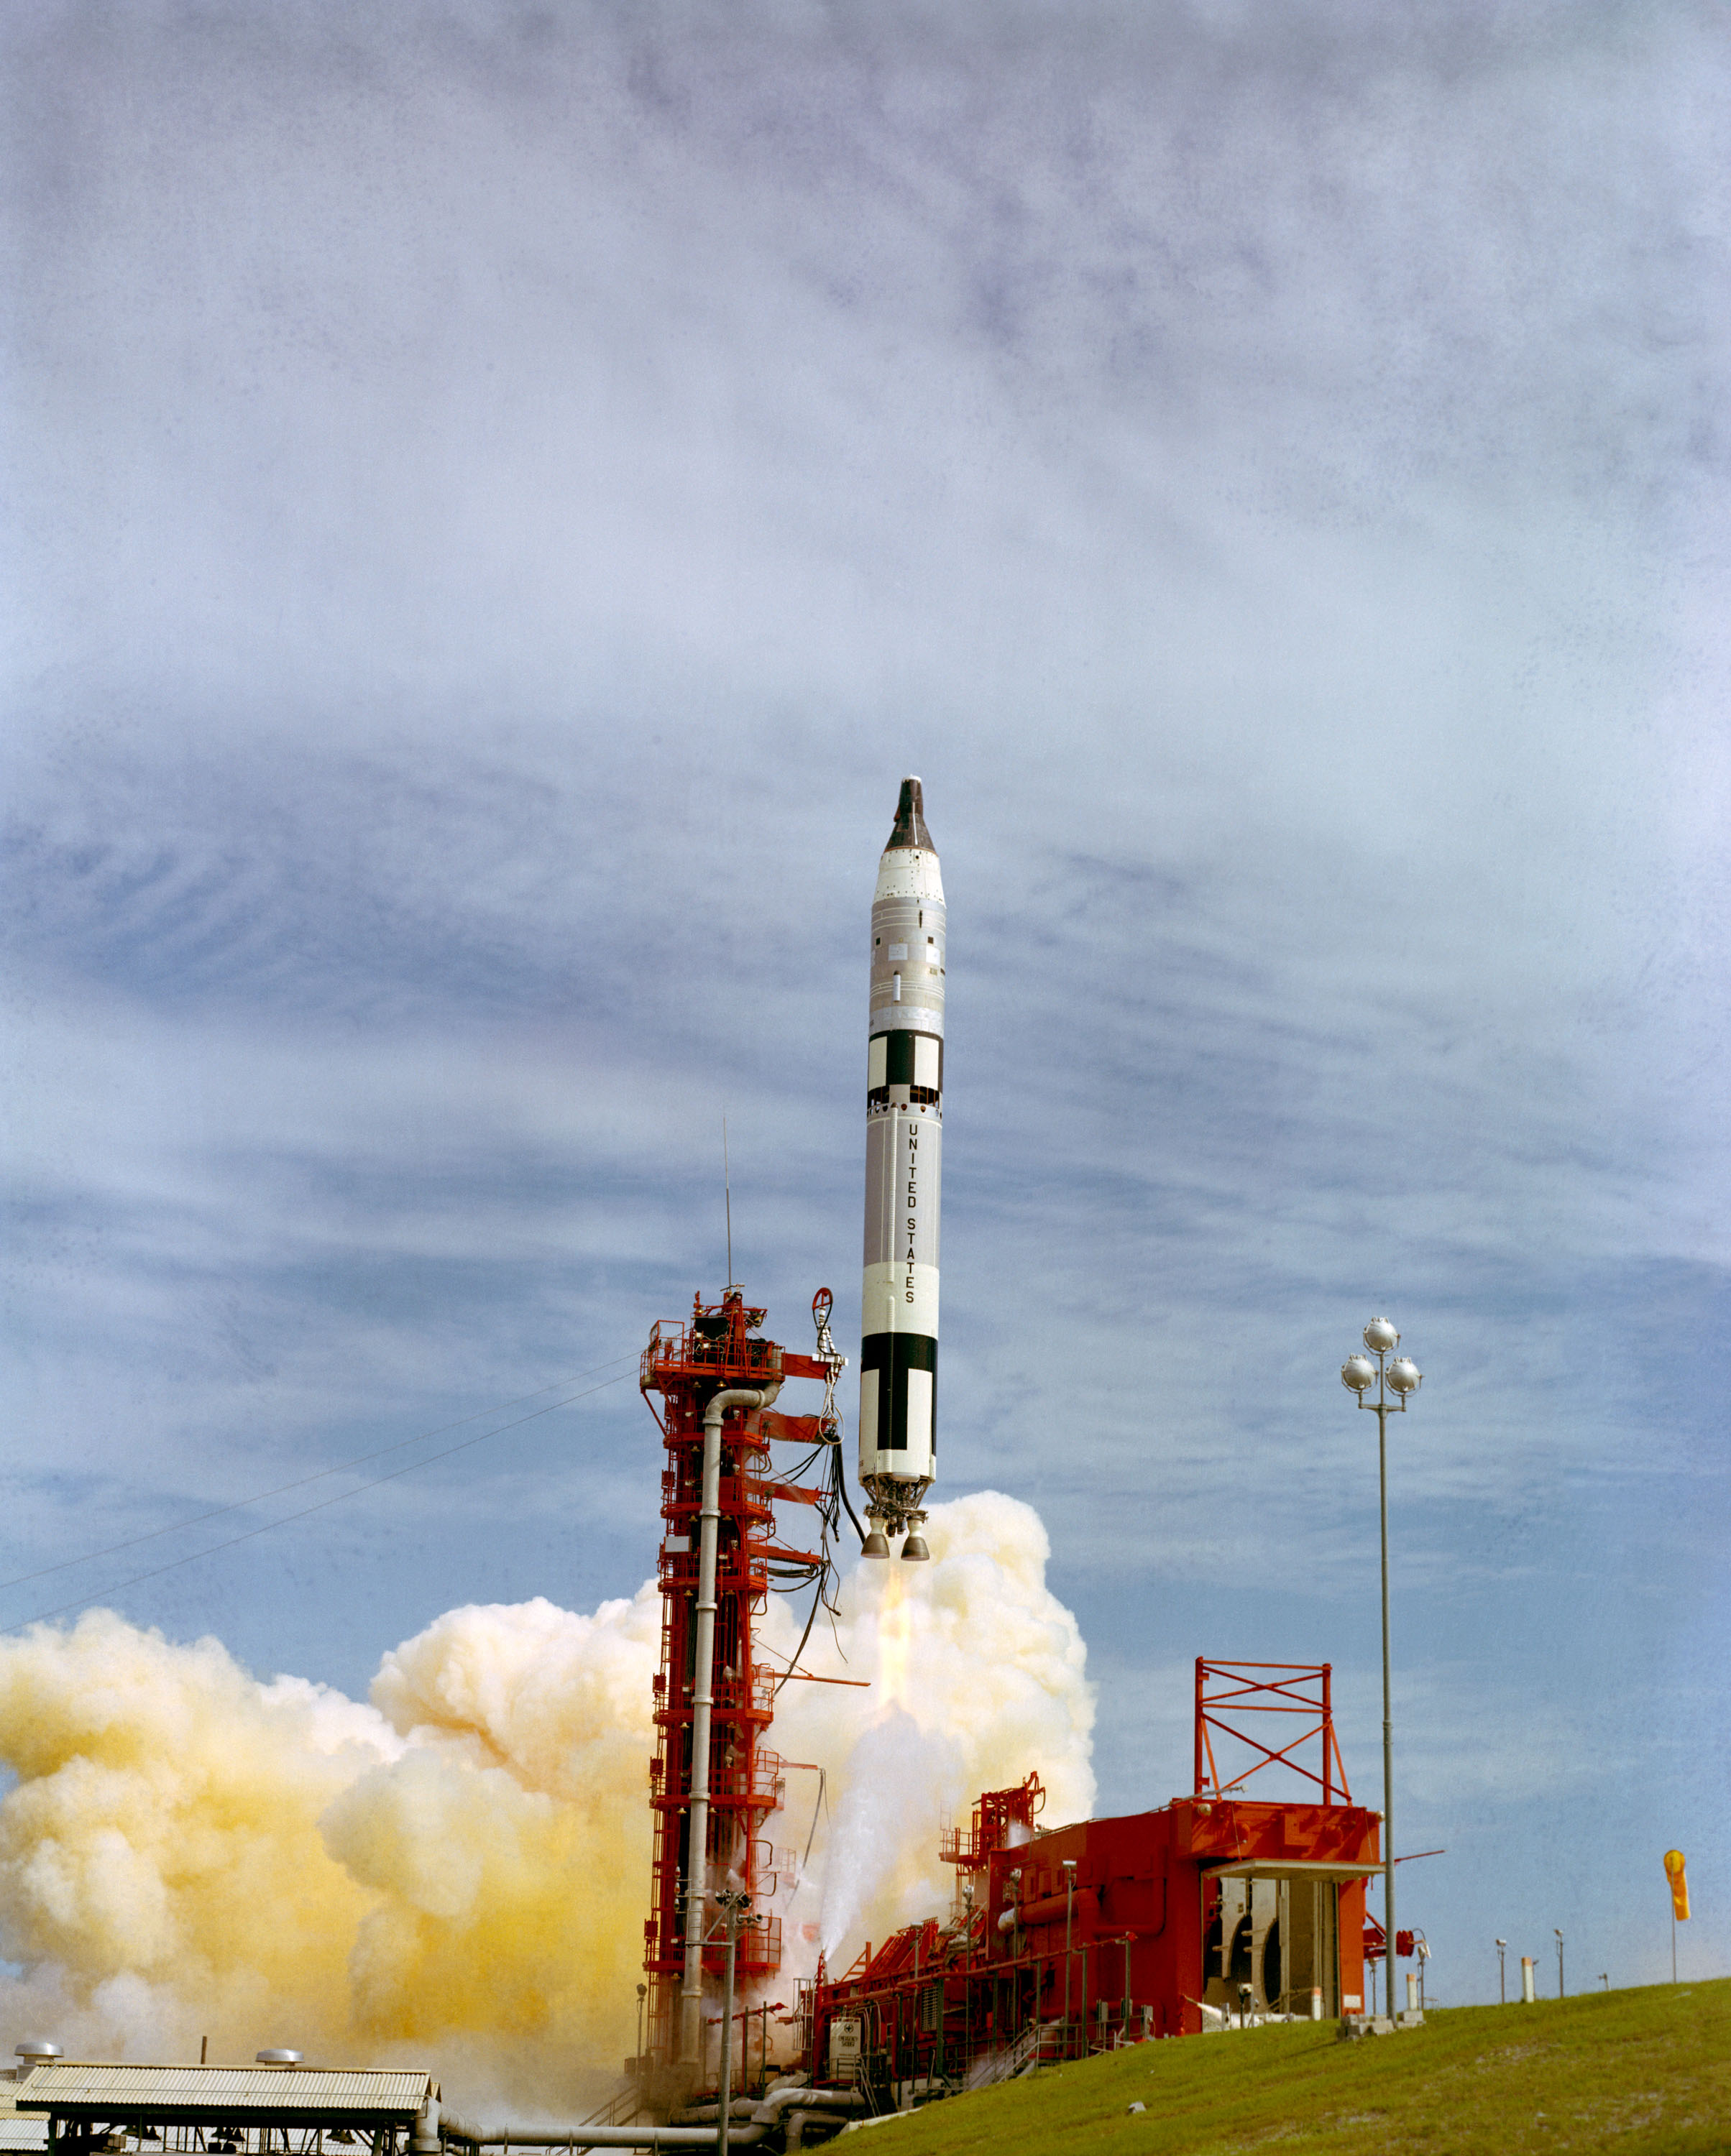 The Gemini-11 spacecraft was successfully launched by NASA from the Kennedy Space Center on Sept. 12, 1966.